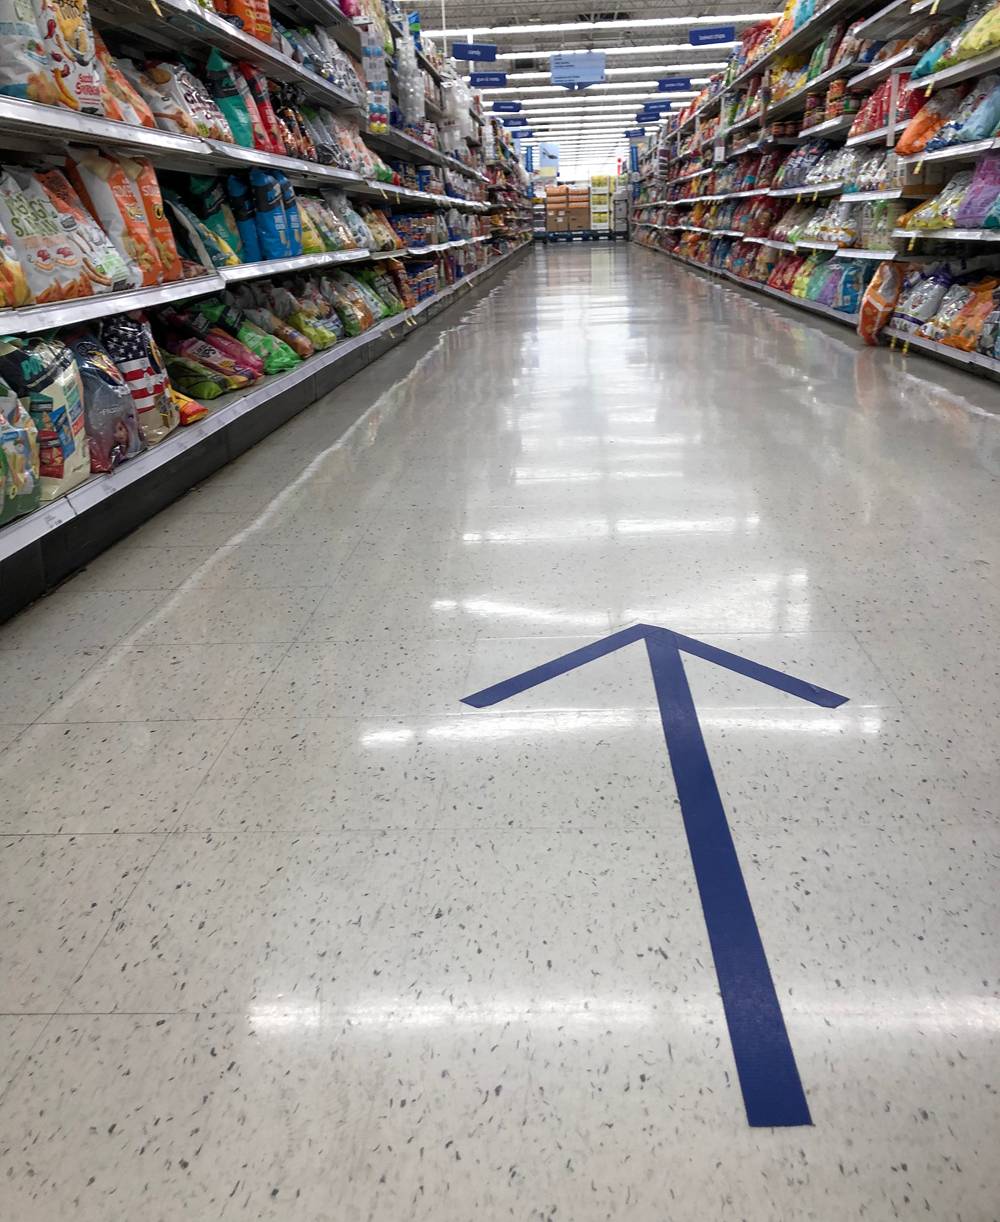 Blue arrow on the floor at Meijer, indicating which direction traffic should move in the grocery aisle. Photo by Jessica Hammie. 